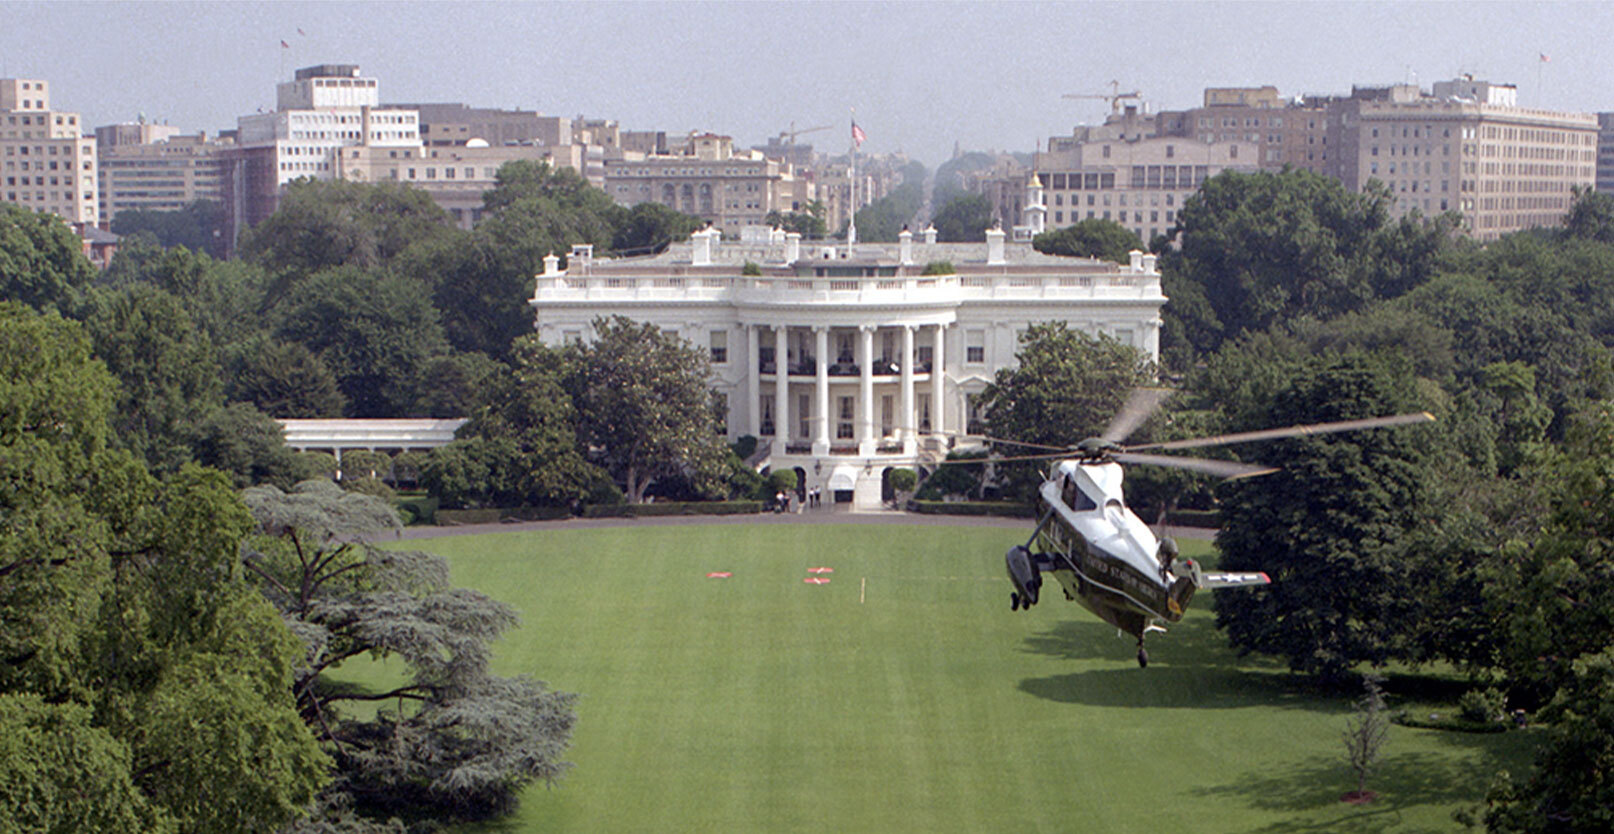 PHOTO: The South Lawn of the White House. SOURCE: PHC C.M. Fitzpatrick with the U.S. Department of Defense via wikimediacommons.com.